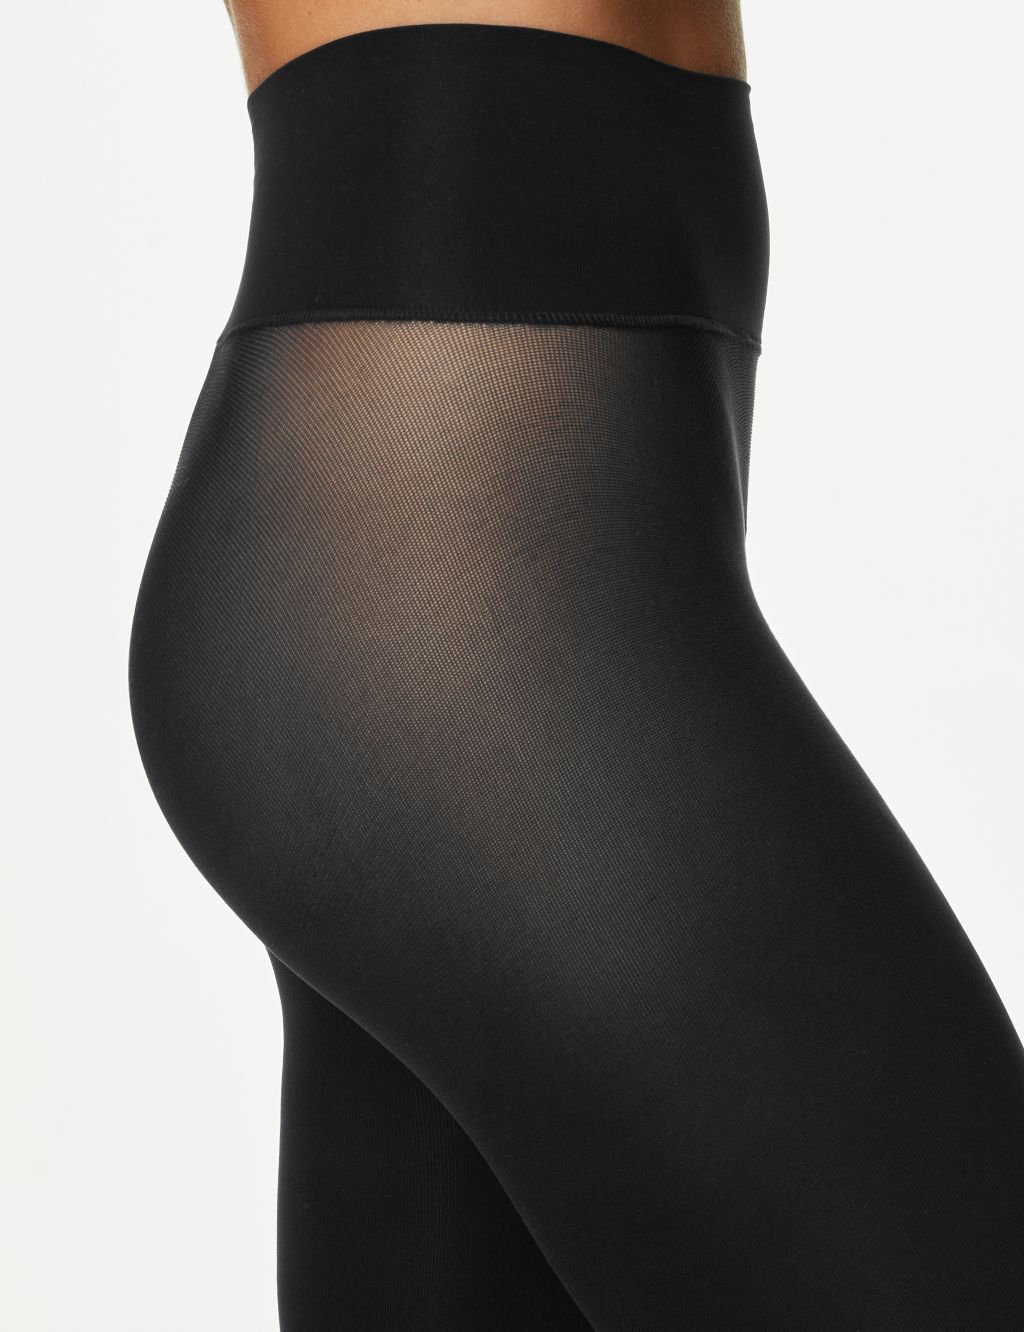 Autograph M&S Seamless Opaque Black Tights